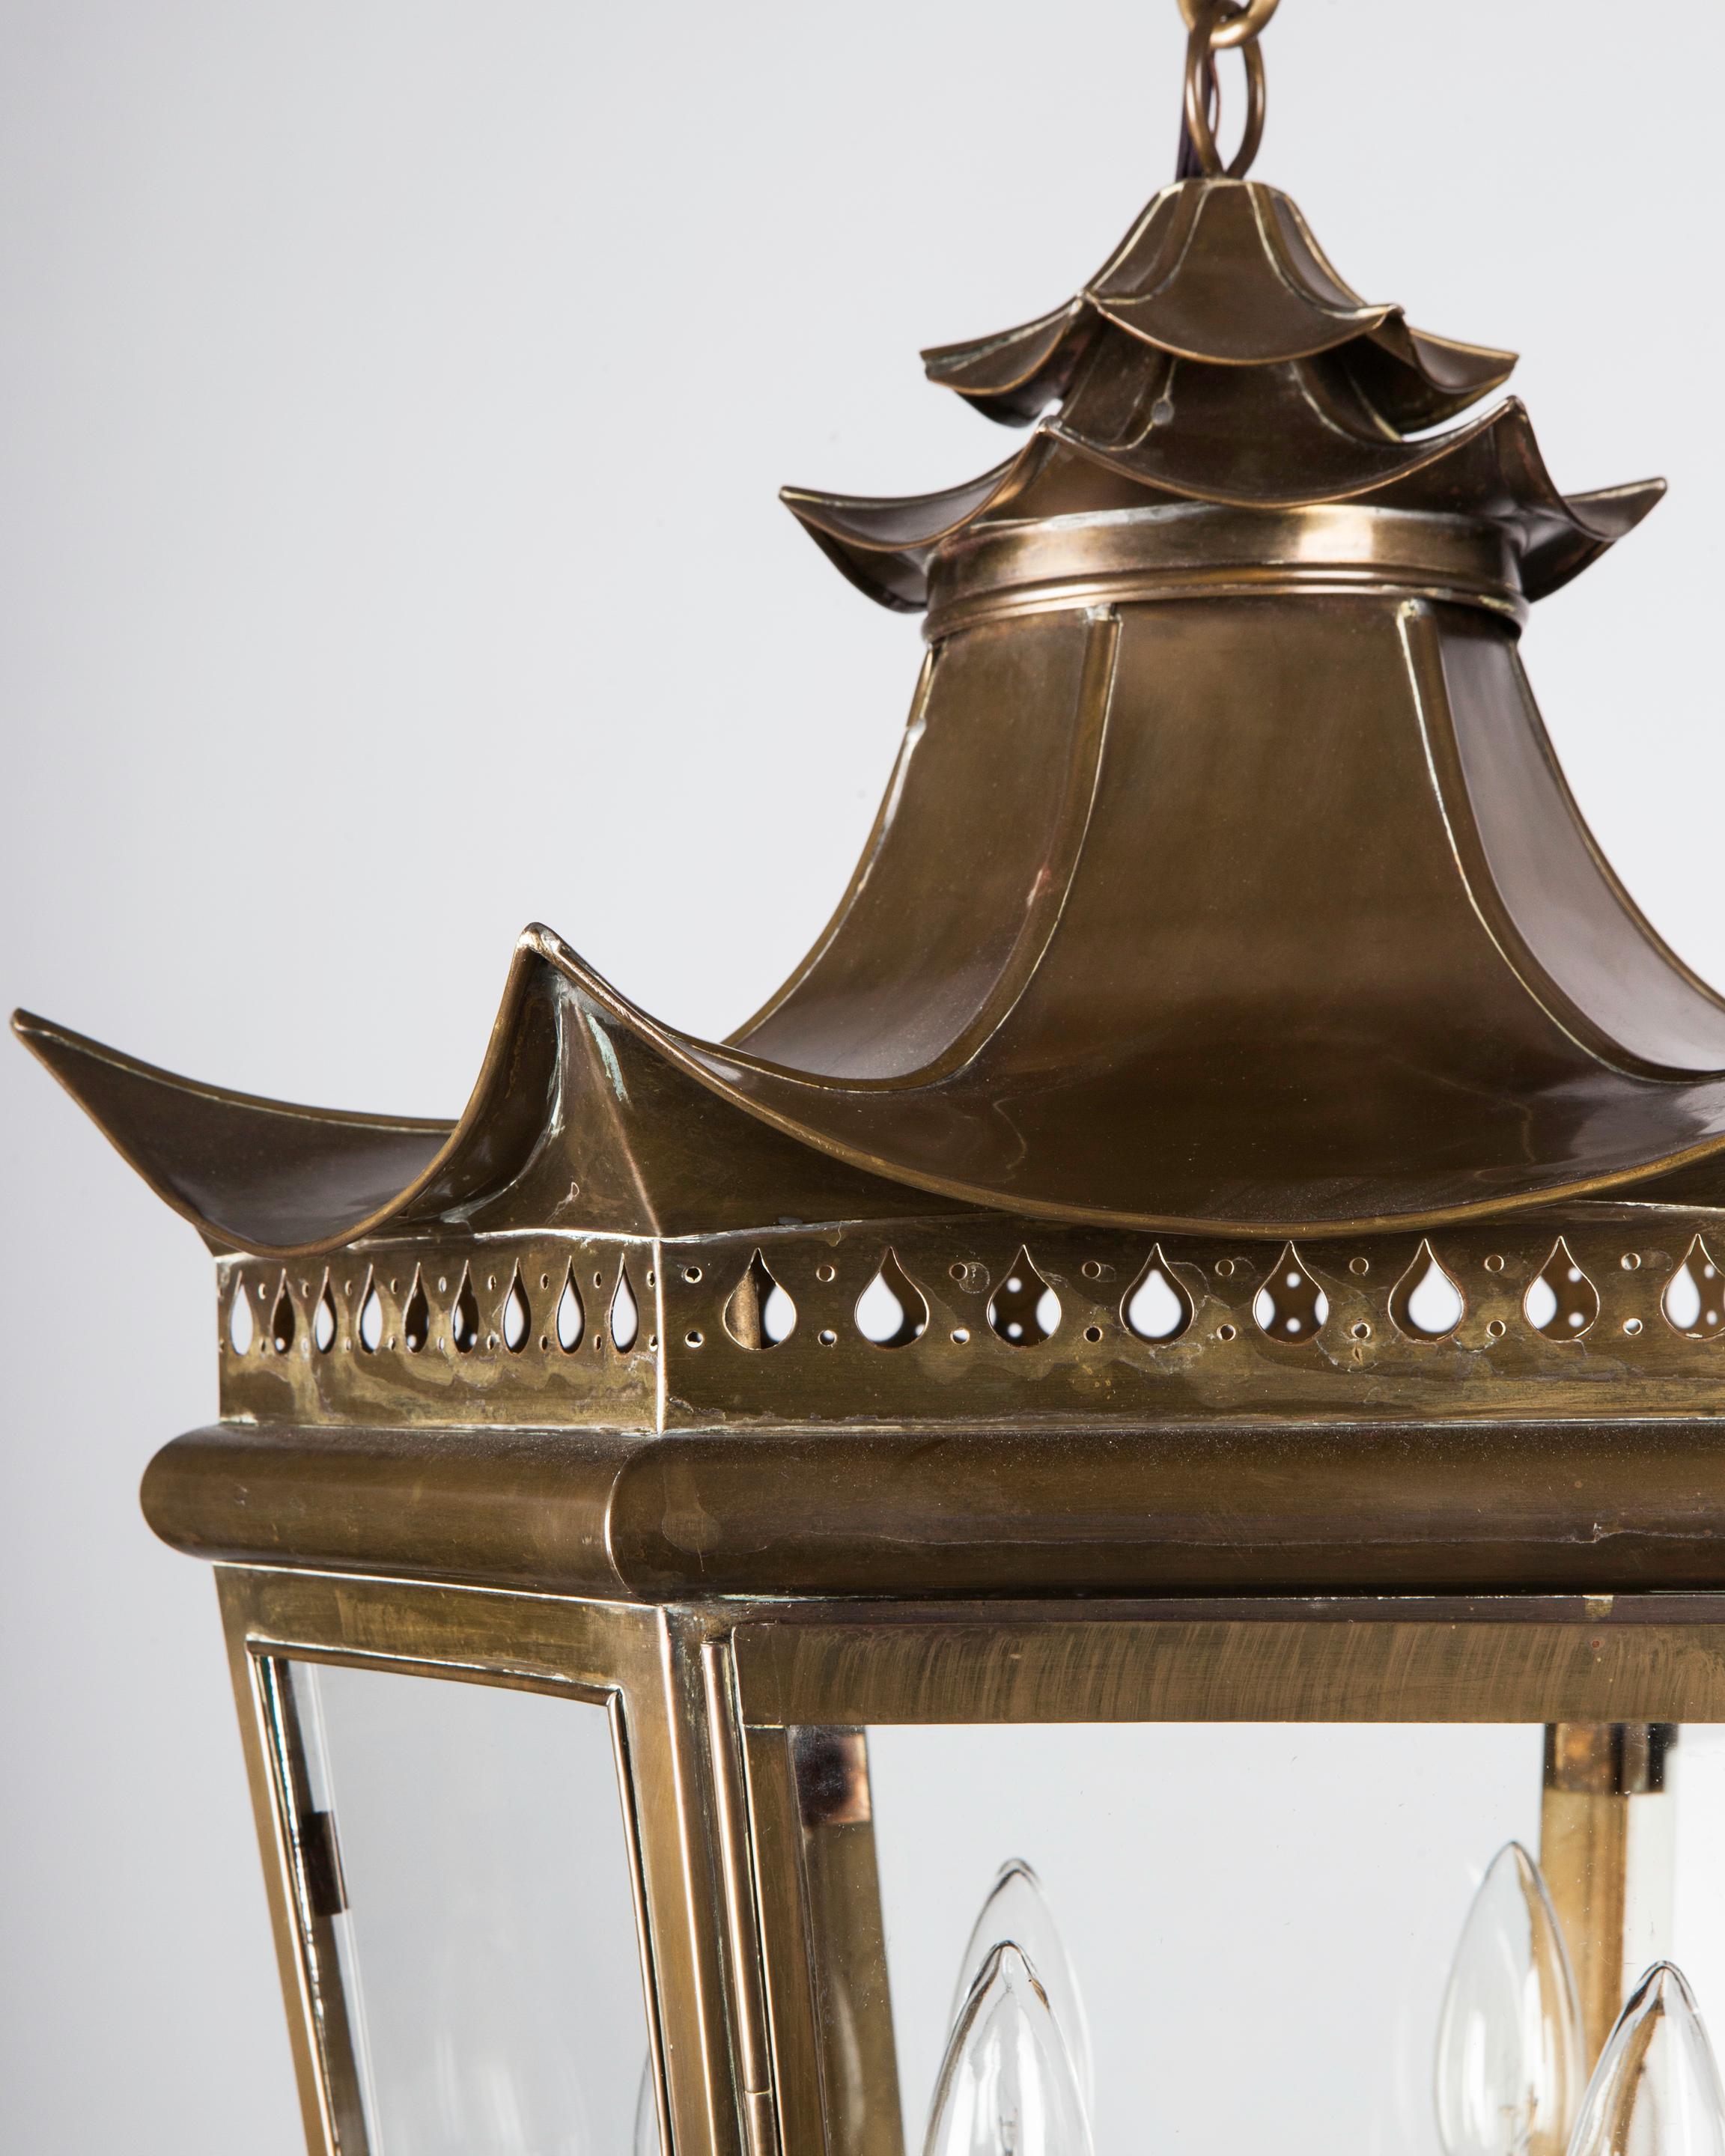 AHL4189

A large vintage brass lantern with a swept-up pagoda form body in its original age-darkened finish. The tapered hexagon frame has pierced details above and below, including a teardrop frieze and the motif of curved panels meeting in